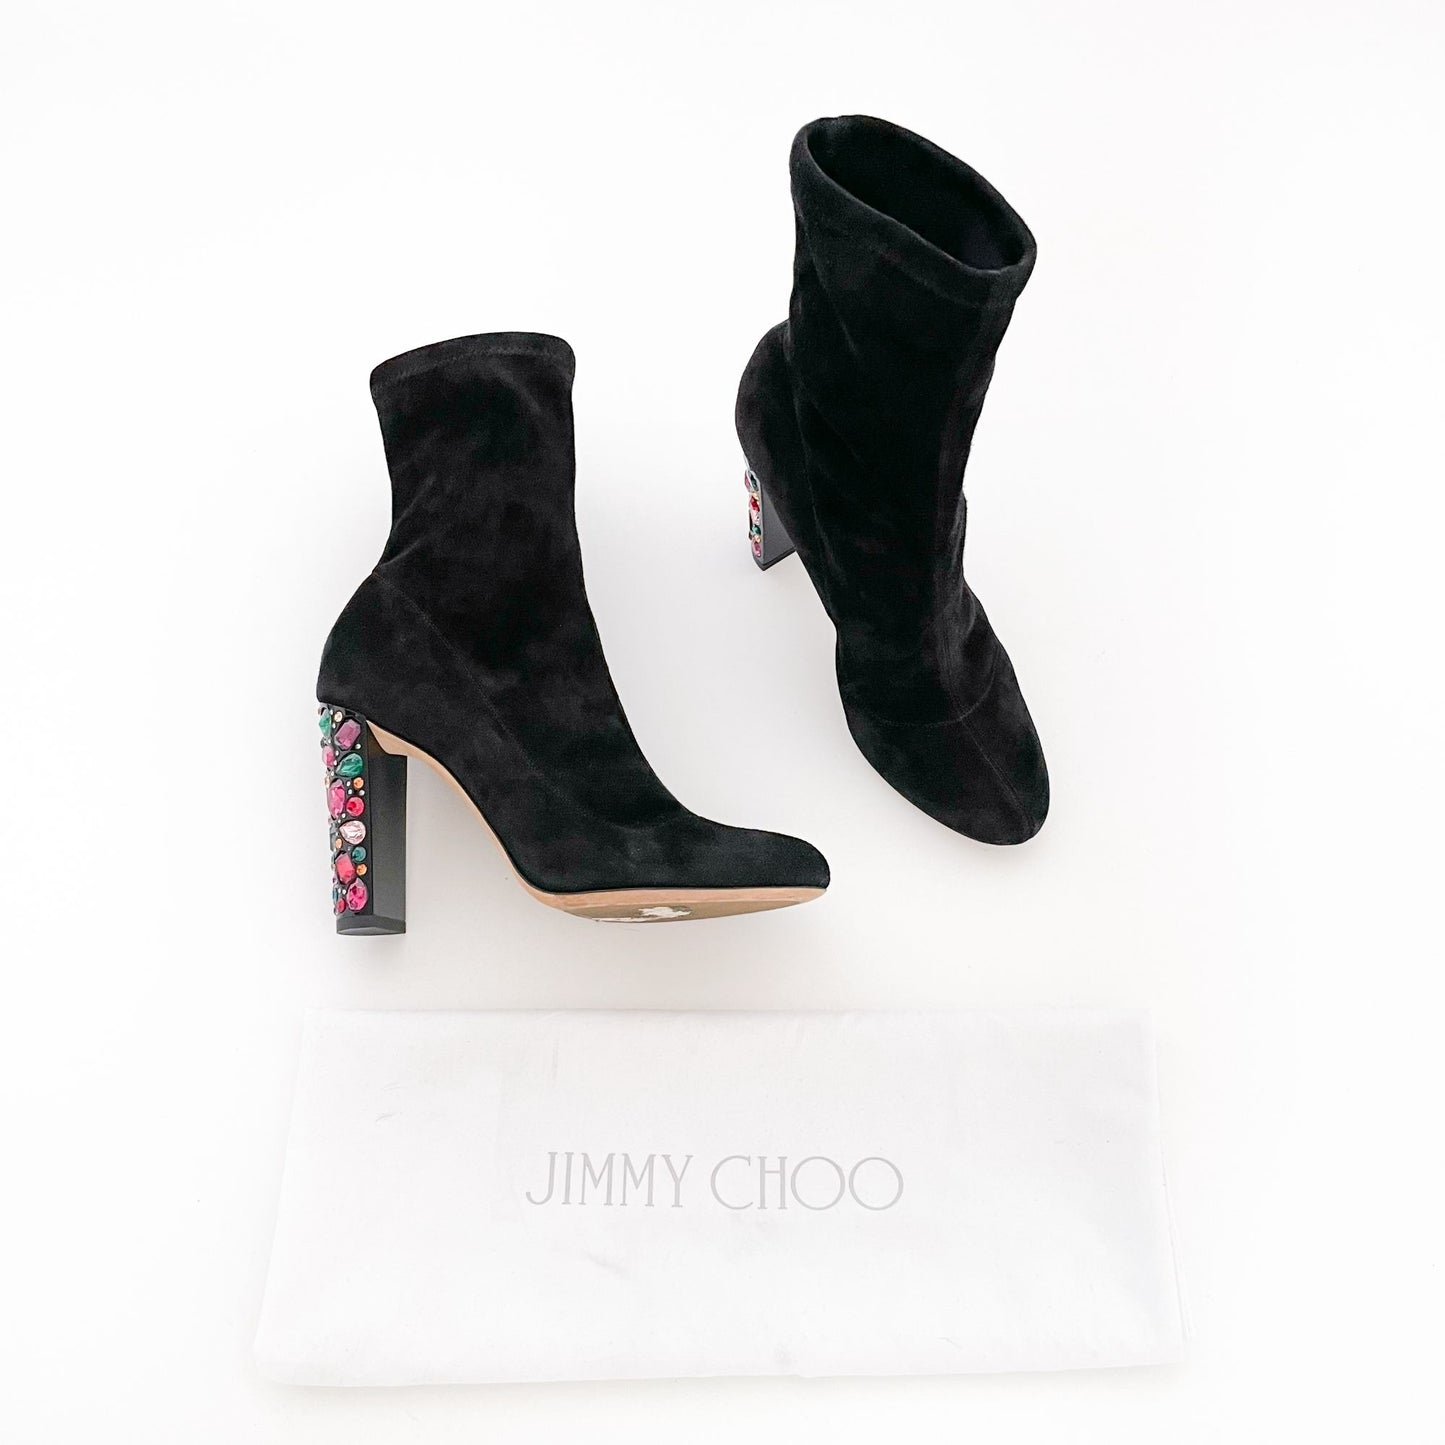 Jimmy Choo Maine 100 Embellished Boots in Black Suede Size 38